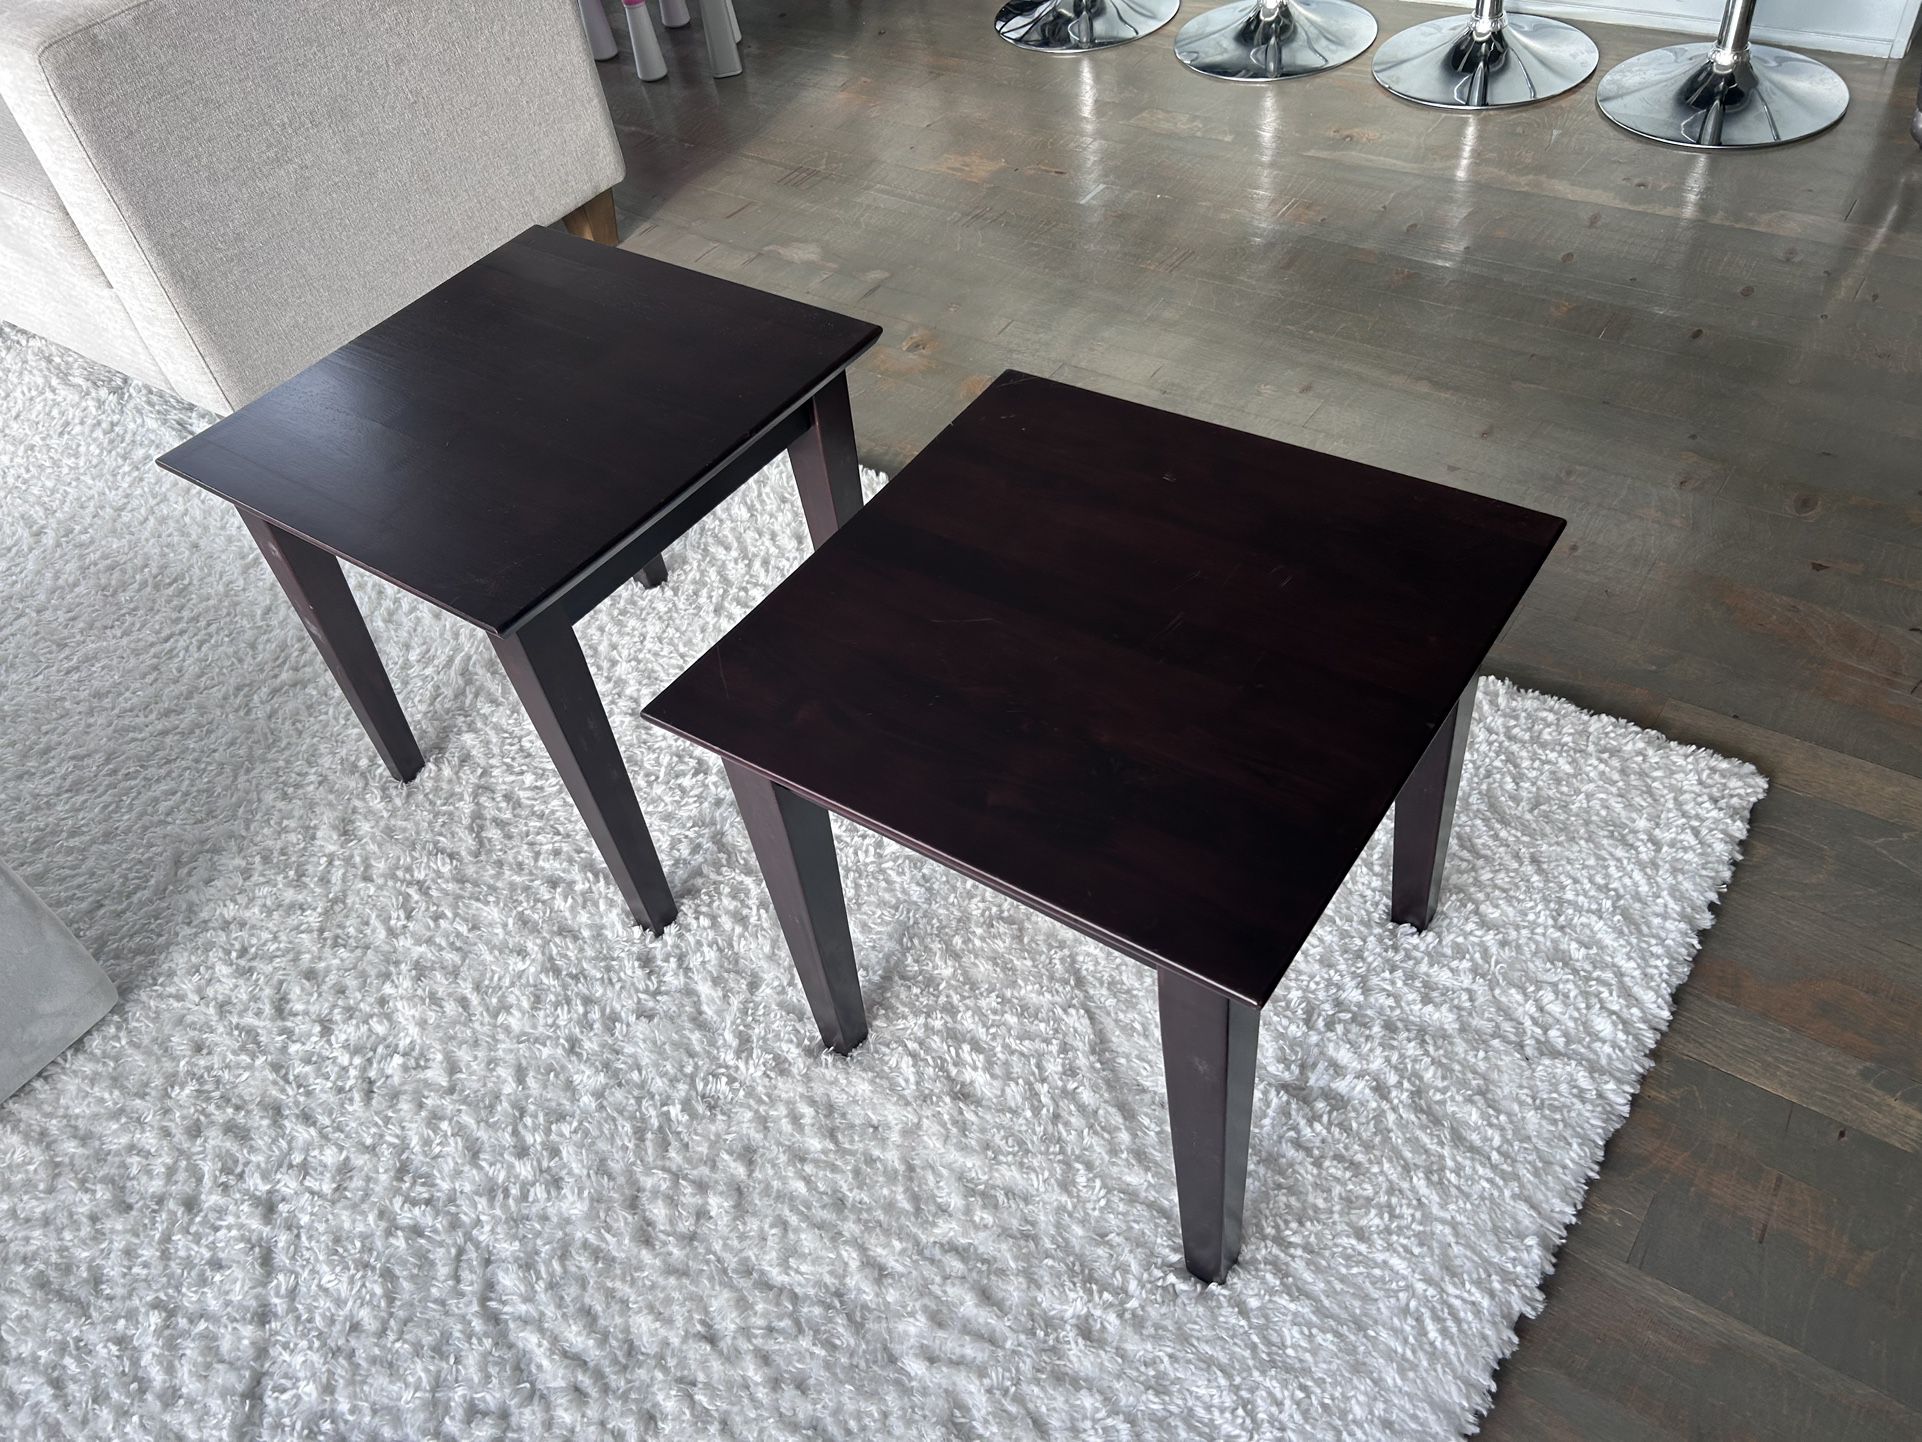 Two Wood End Tables (Dark Brown)